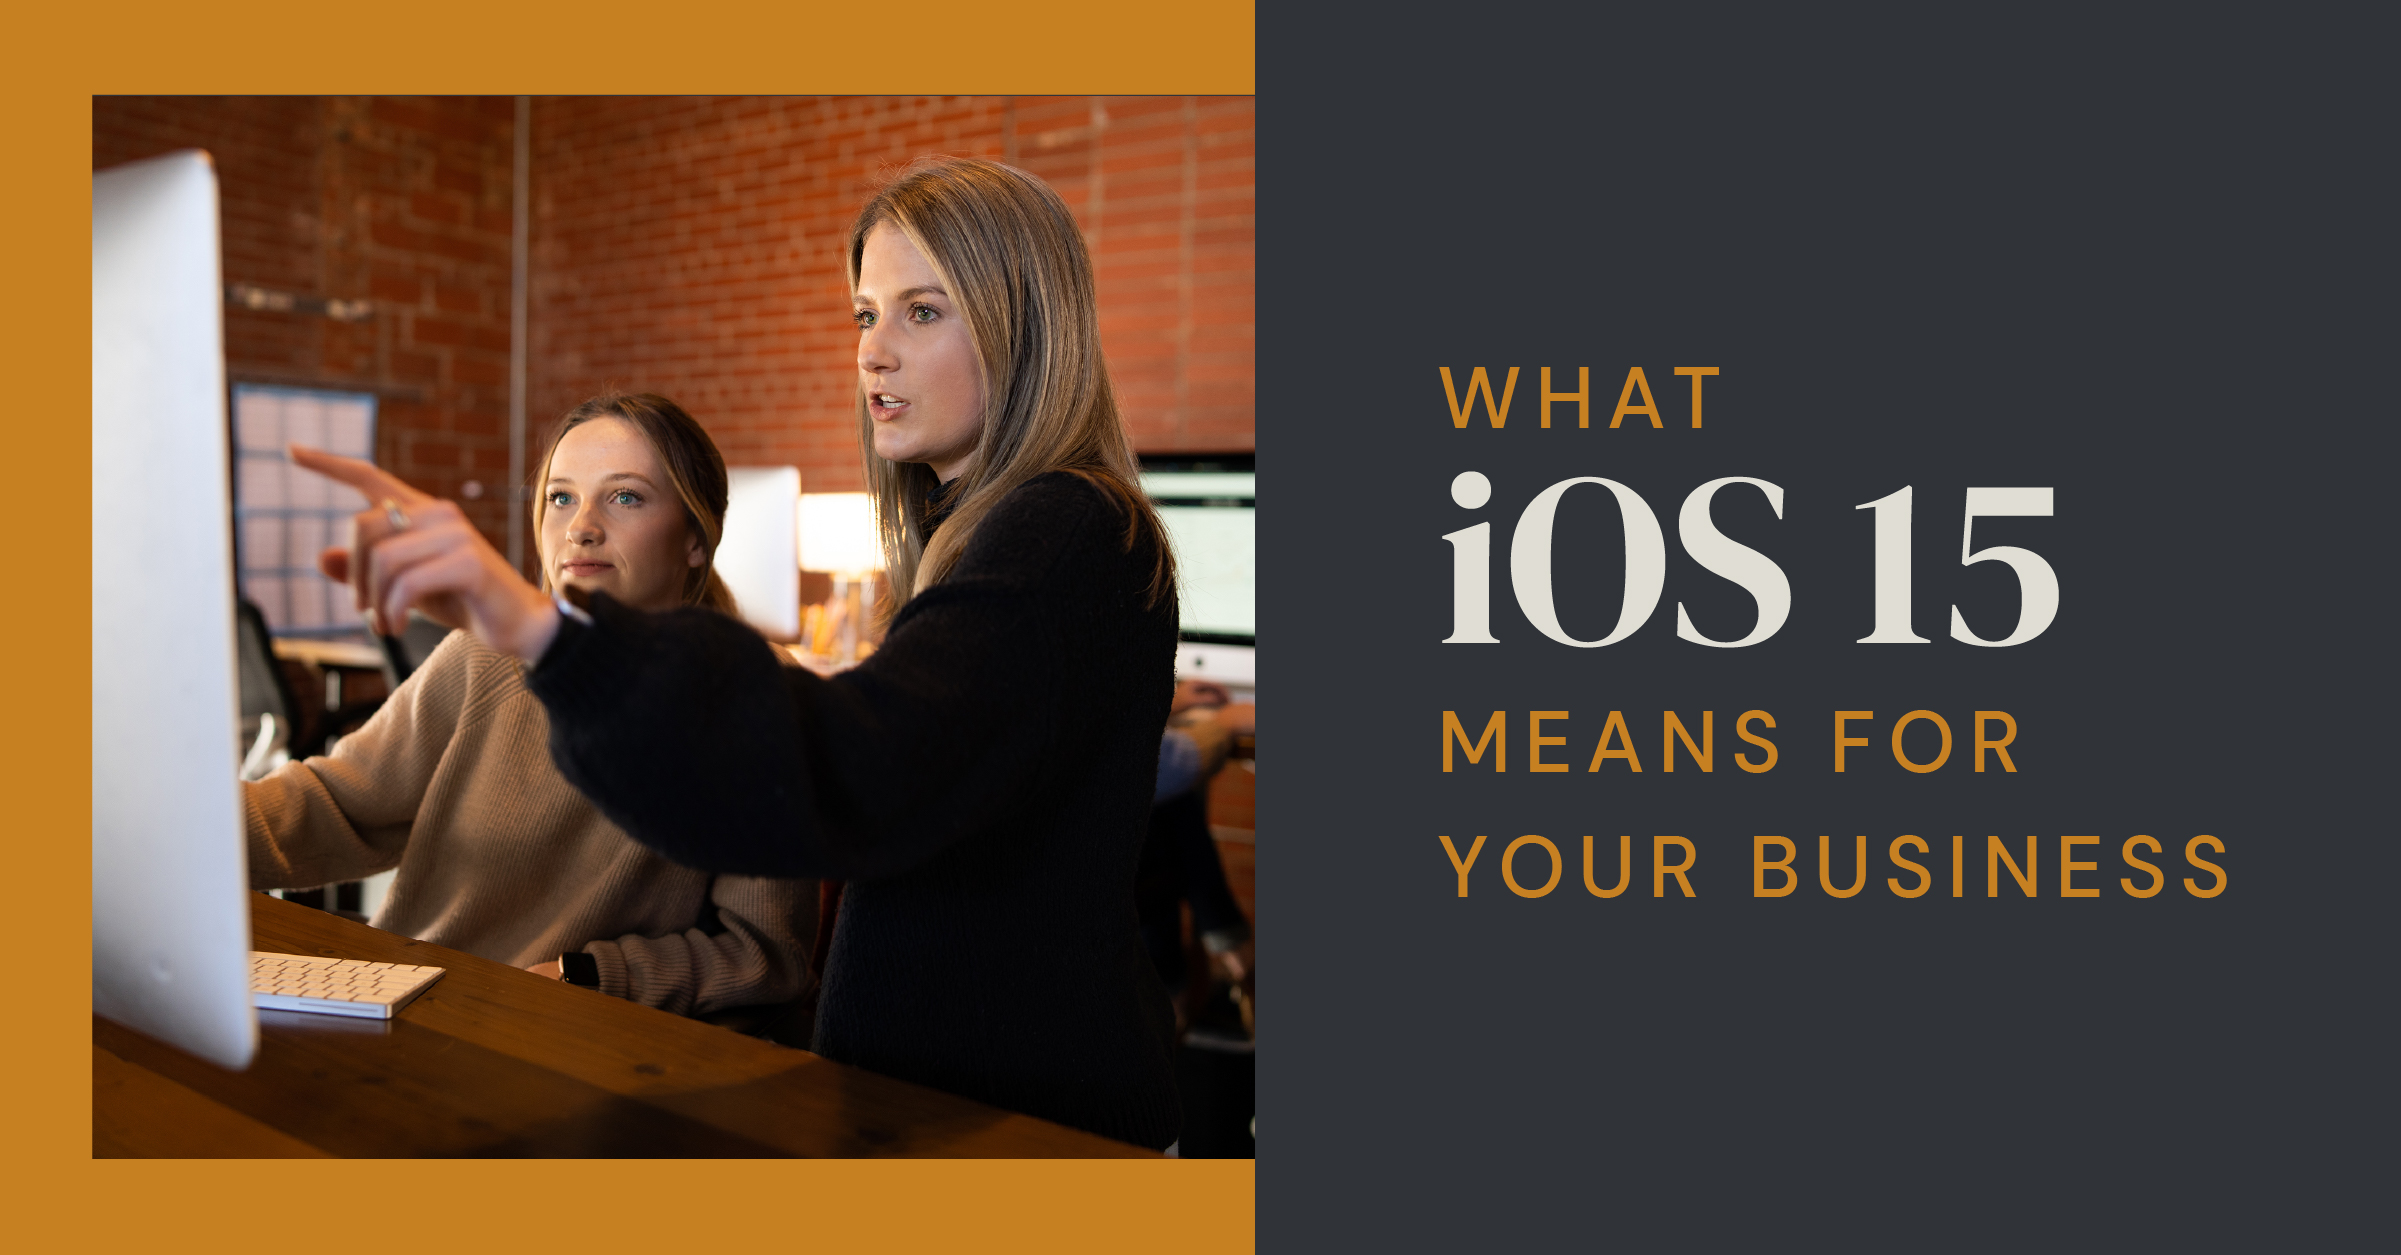 iOS15 effects on your business